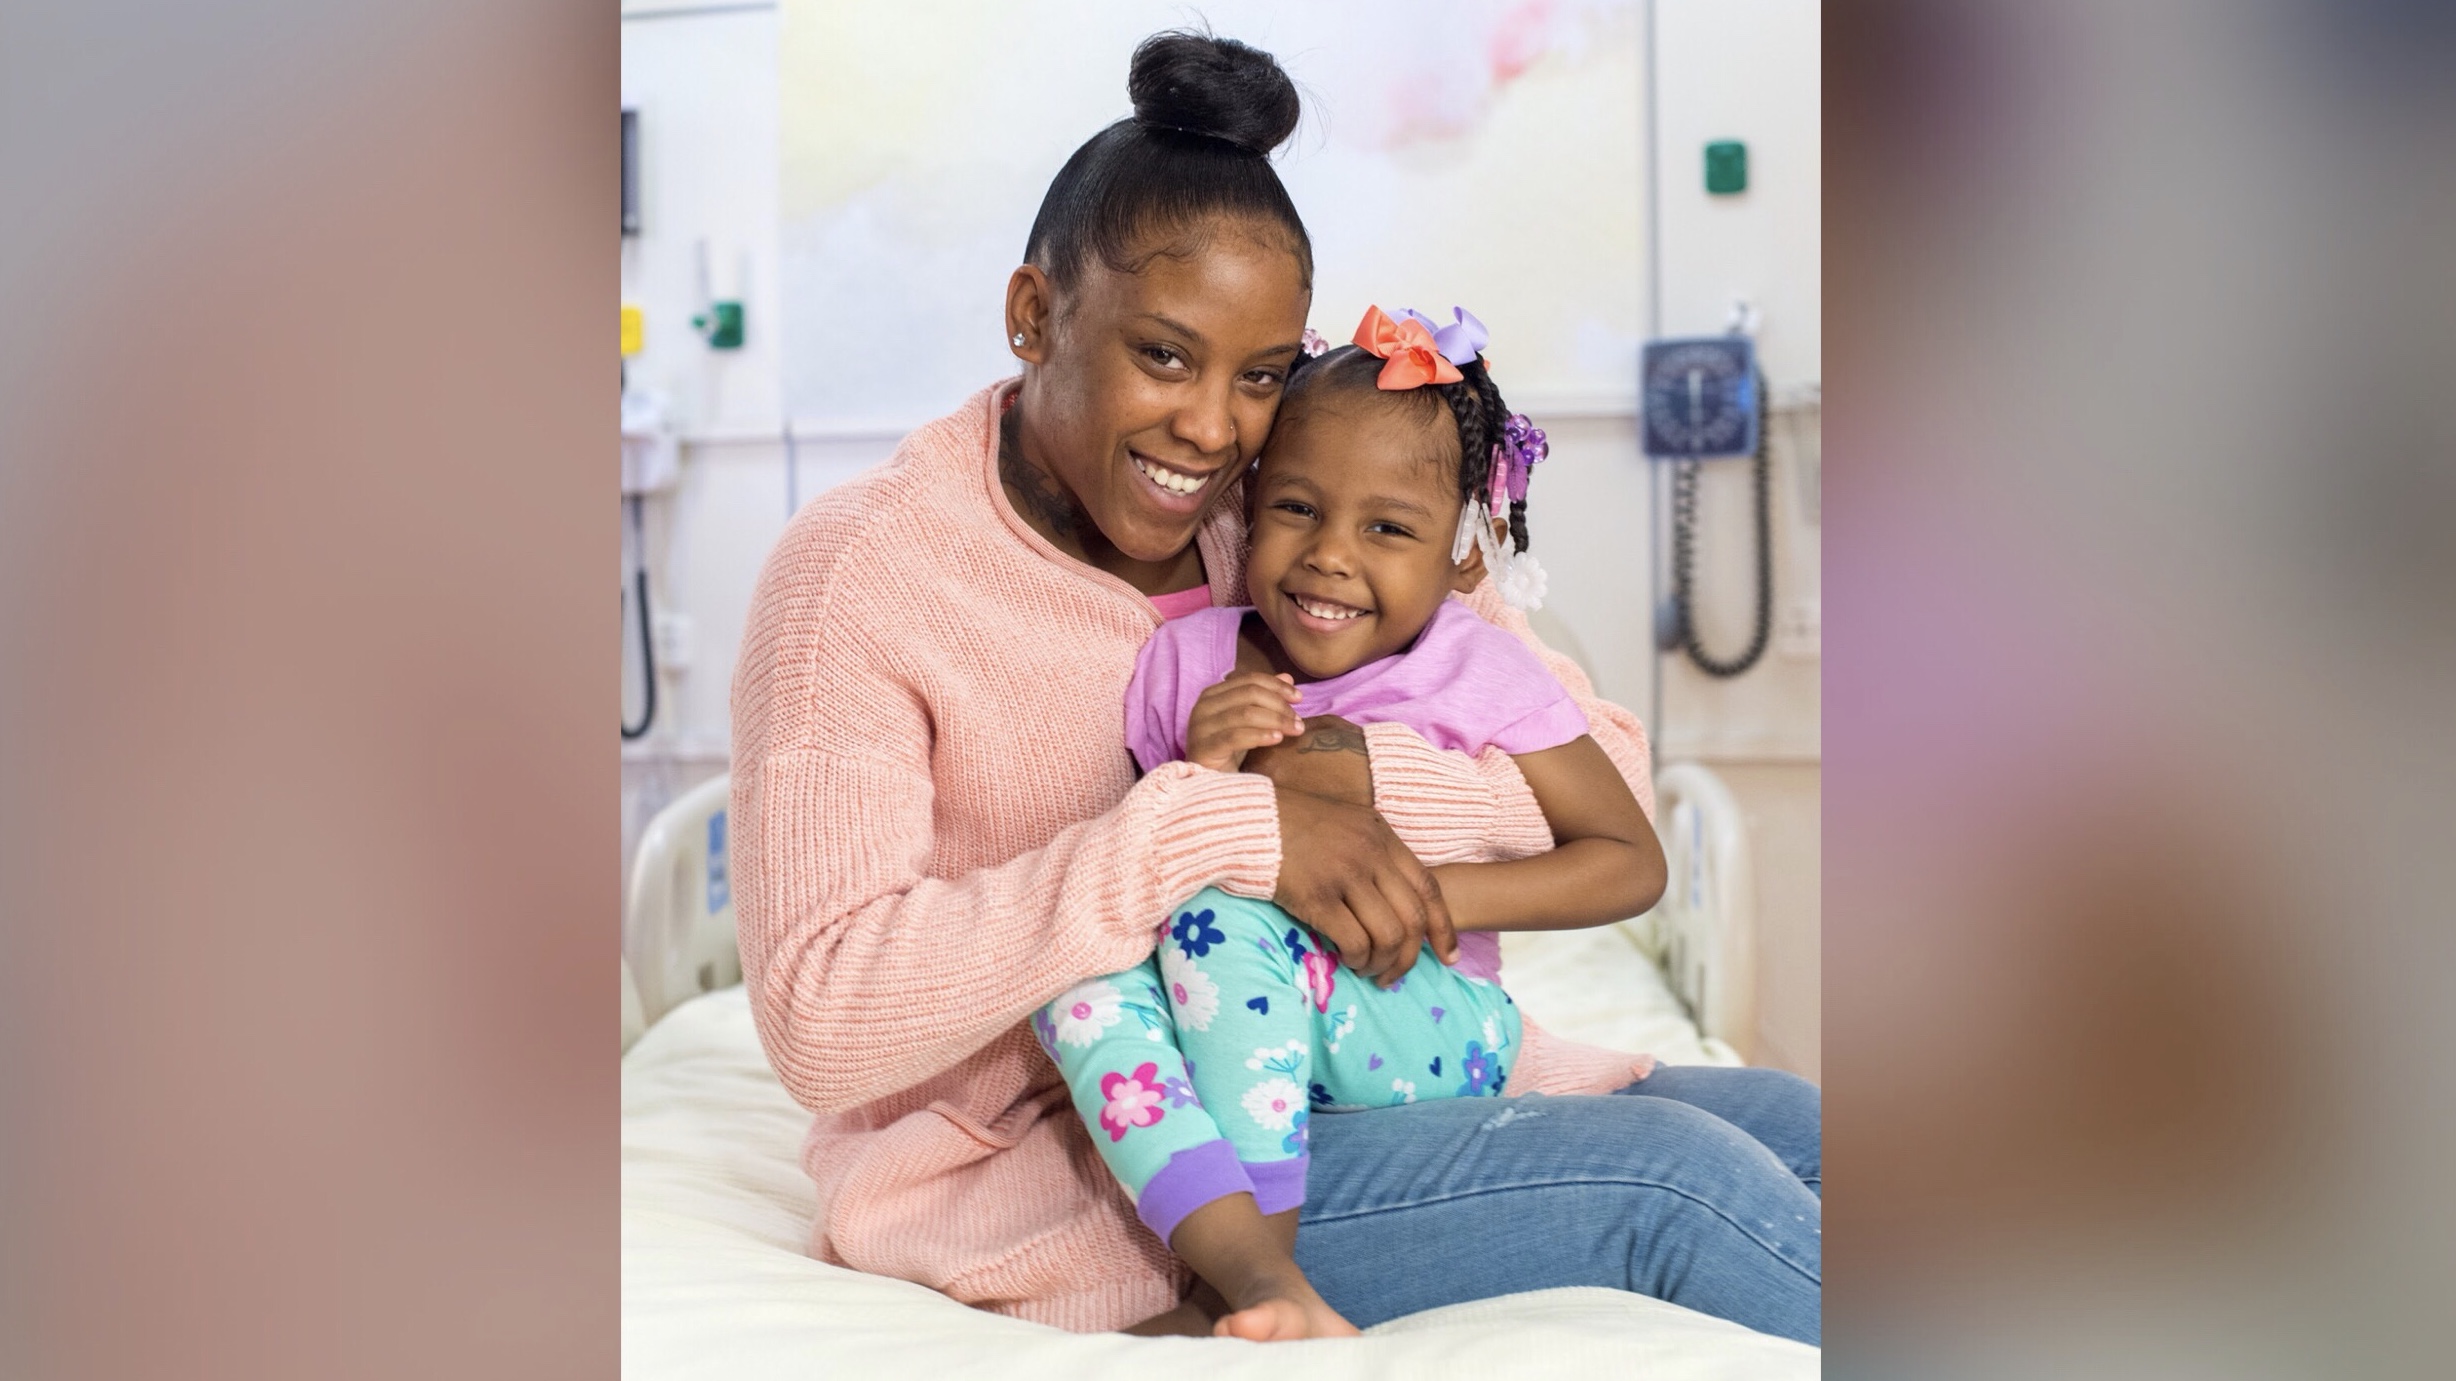 St. Jude Children’s Research Hospital® Continues to Raise Awareness On Sickle Cell Disease for World Sickle Cell Day